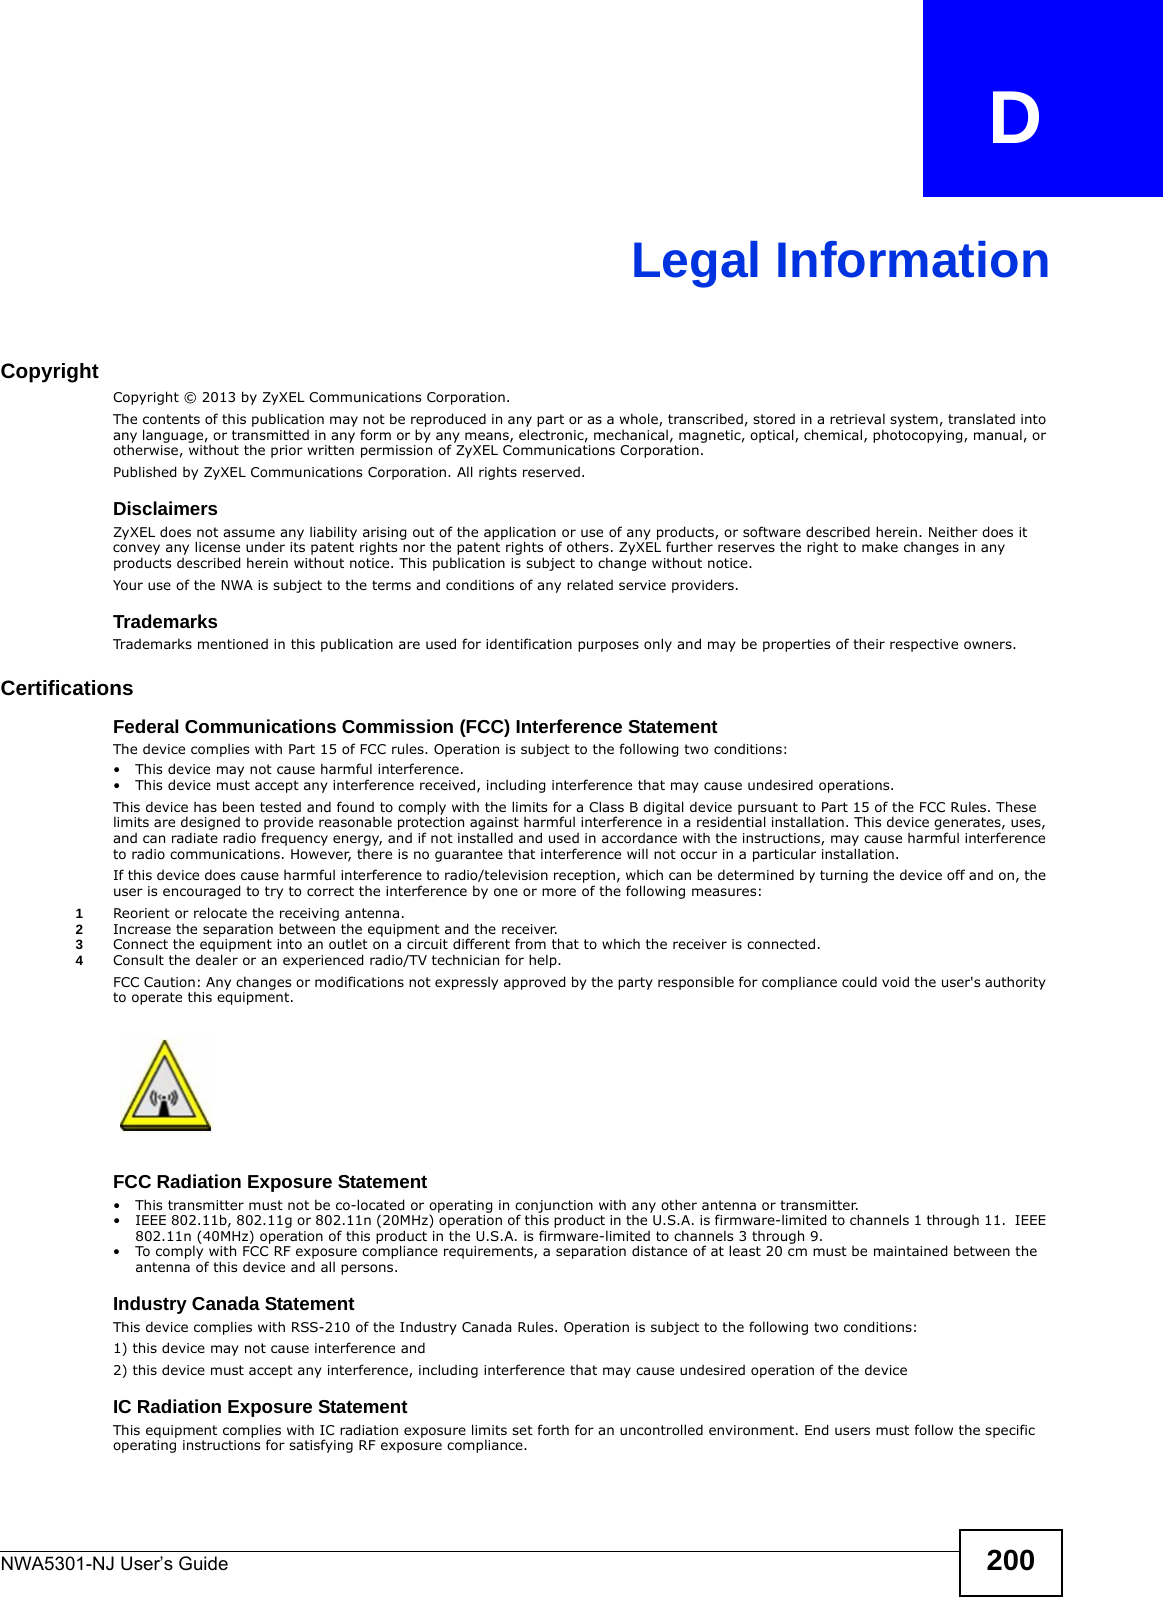 NWA5301-NJ User’s Guide 200APPENDIX   DLegal InformationCopyrightCopyright © 2013 by ZyXEL Communications Corporation.The contents of this publication may not be reproduced in any part or as a whole, transcribed, stored in a retrieval system, translated into any language, or transmitted in any form or by any means, electronic, mechanical, magnetic, optical, chemical, photocopying, manual, or otherwise, without the prior written permission of ZyXEL Communications Corporation.Published by ZyXEL Communications Corporation. All rights reserved.DisclaimersZyXEL does not assume any liability arising out of the application or use of any products, or software described herein. Neither does it convey any license under its patent rights nor the patent rights of others. ZyXEL further reserves the right to make changes in any products described herein without notice. This publication is subject to change without notice.Your use of the NWA is subject to the terms and conditions of any related service providers. TrademarksTrademarks mentioned in this publication are used for identification purposes only and may be properties of their respective owners.CertificationsFederal Communications Commission (FCC) Interference StatementThe device complies with Part 15 of FCC rules. Operation is subject to the following two conditions:• This device may not cause harmful interference.• This device must accept any interference received, including interference that may cause undesired operations.This device has been tested and found to comply with the limits for a Class B digital device pursuant to Part 15 of the FCC Rules. These limits are designed to provide reasonable protection against harmful interference in a residential installation. This device generates, uses, and can radiate radio frequency energy, and if not installed and used in accordance with the instructions, may cause harmful interference to radio communications. However, there is no guarantee that interference will not occur in a particular installation.If this device does cause harmful interference to radio/television reception, which can be determined by turning the device off and on, the user is encouraged to try to correct the interference by one or more of the following measures:1Reorient or relocate the receiving antenna.2Increase the separation between the equipment and the receiver.3Connect the equipment into an outlet on a circuit different from that to which the receiver is connected.4Consult the dealer or an experienced radio/TV technician for help.FCC Caution: Any changes or modifications not expressly approved by the party responsible for compliance could void the user&apos;s authority to operate this equipment. FCC Radiation Exposure Statement• This transmitter must not be co-located or operating in conjunction with any other antenna or transmitter. • IEEE 802.11b, 802.11g or 802.11n (20MHz) operation of this product in the U.S.A. is firmware-limited to channels 1 through 11.  IEEE 802.11n (40MHz) operation of this product in the U.S.A. is firmware-limited to channels 3 through 9. • To comply with FCC RF exposure compliance requirements, a separation distance of at least 20 cm must be maintained between the antenna of this device and all persons. Industry Canada Statement This device complies with RSS-210 of the Industry Canada Rules. Operation is subject to the following two conditions:1) this device may not cause interference and2) this device must accept any interference, including interference that may cause undesired operation of the deviceIC Radiation Exposure StatementThis equipment complies with IC radiation exposure limits set forth for an uncontrolled environment. End users must follow the specific operating instructions for satisfying RF exposure compliance.